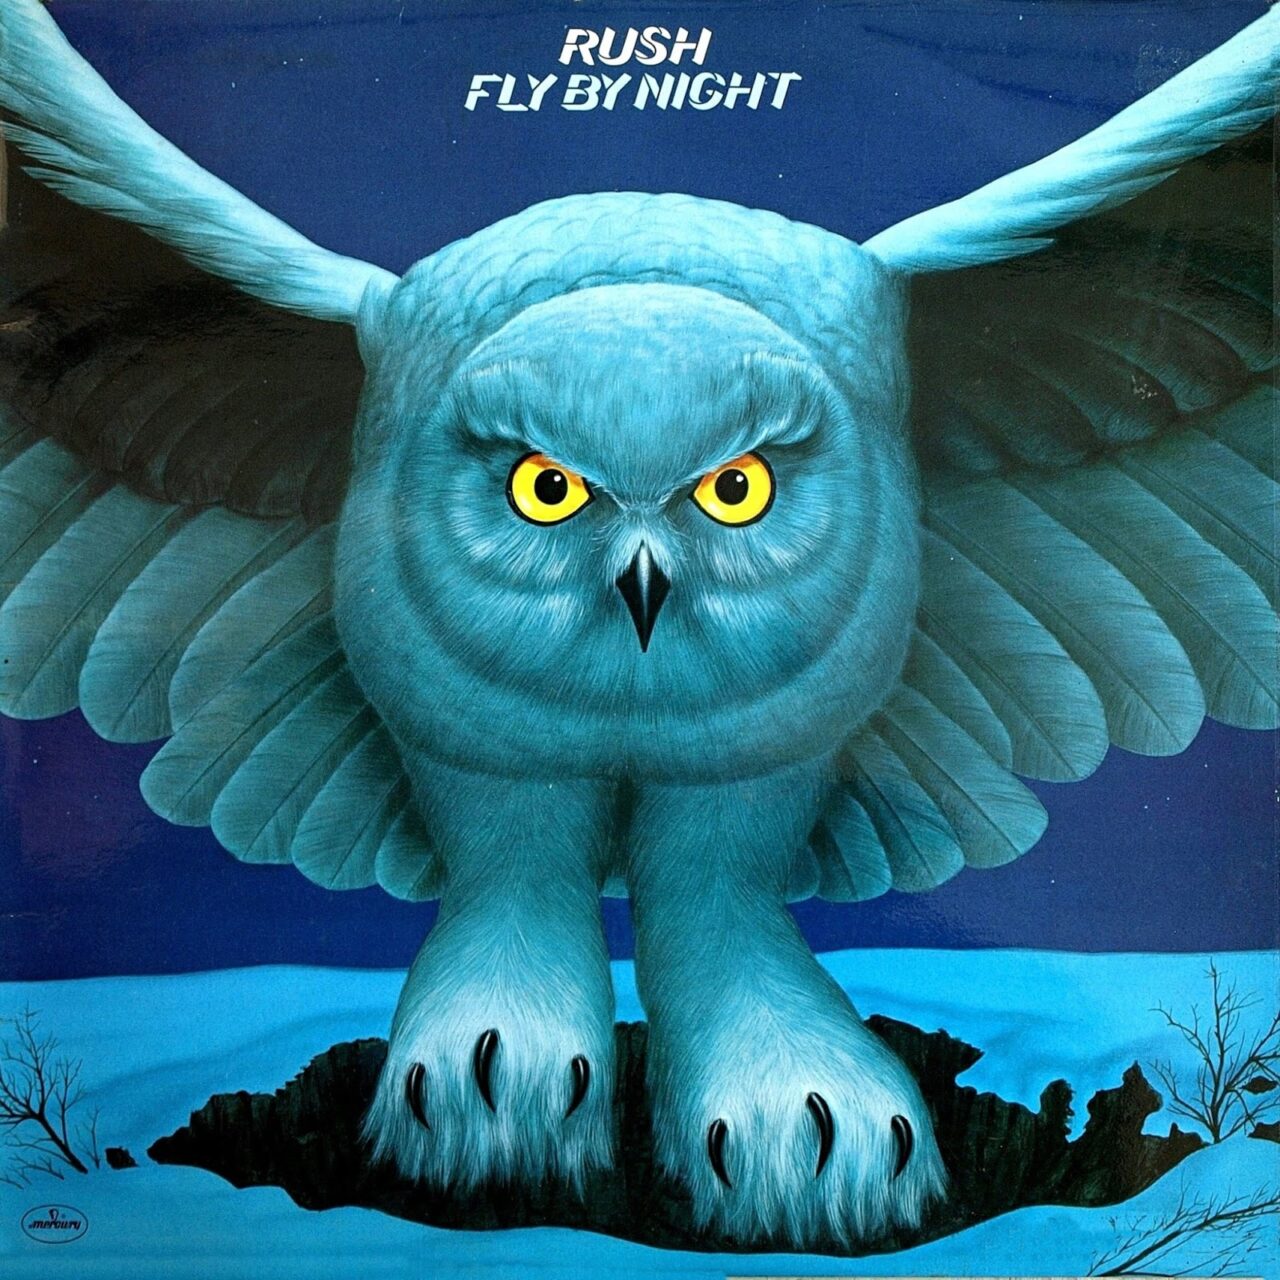 https://www.harrisonsrecords.cl/wp-content/uploads/2023/03/RUSH-FLY-BY-NIGHT-scaled.jpg